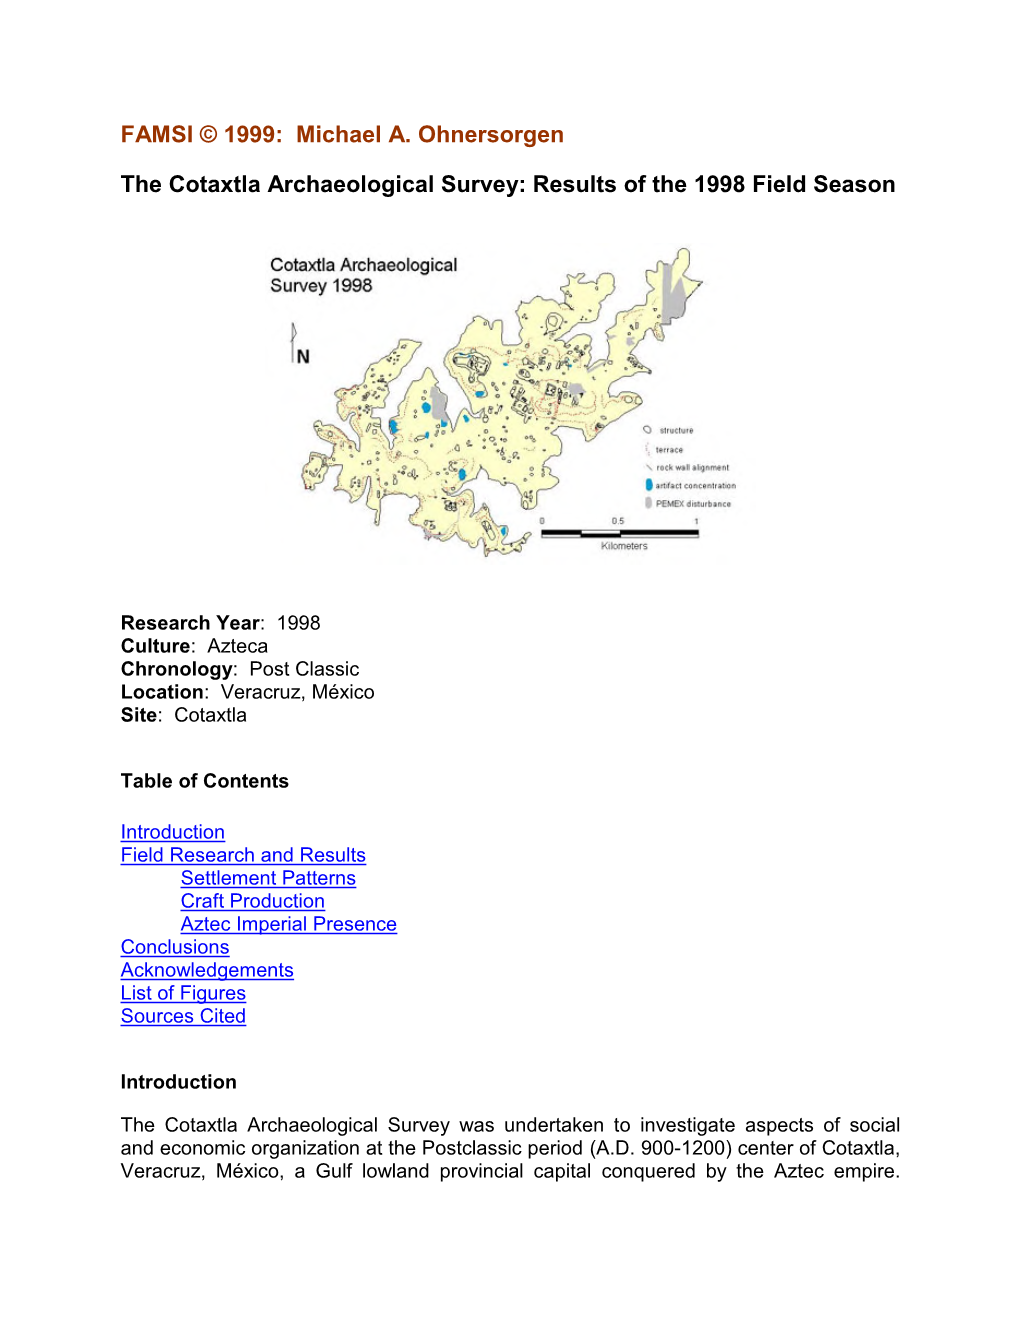 The Cotaxtla Archaeological Survey: Results of the 1998 Field Season